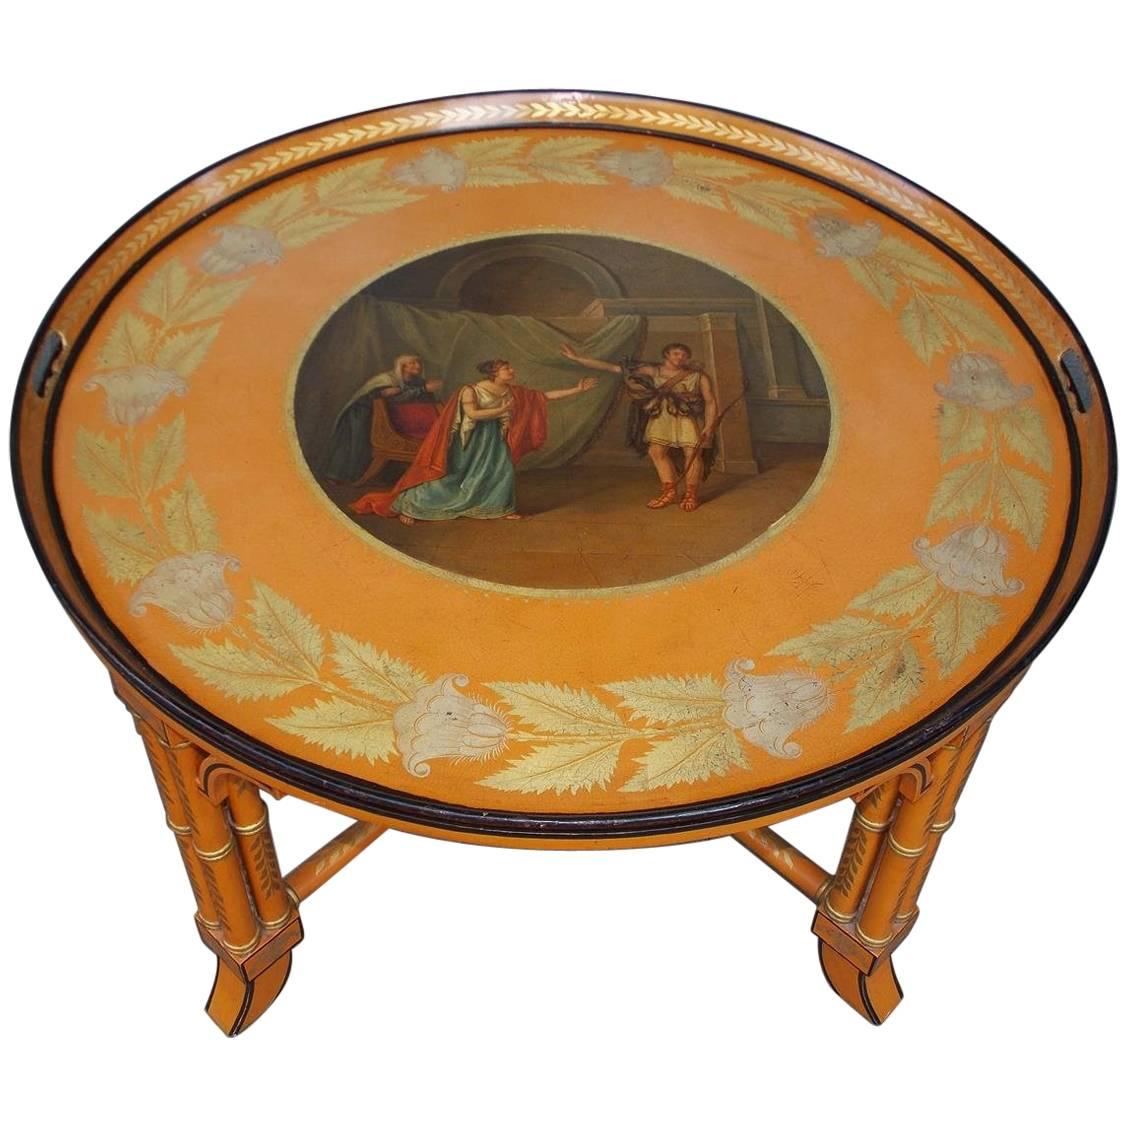 English Regency Figural Circular Tole Tray on Faux Bamboo Stand, Circa 1810